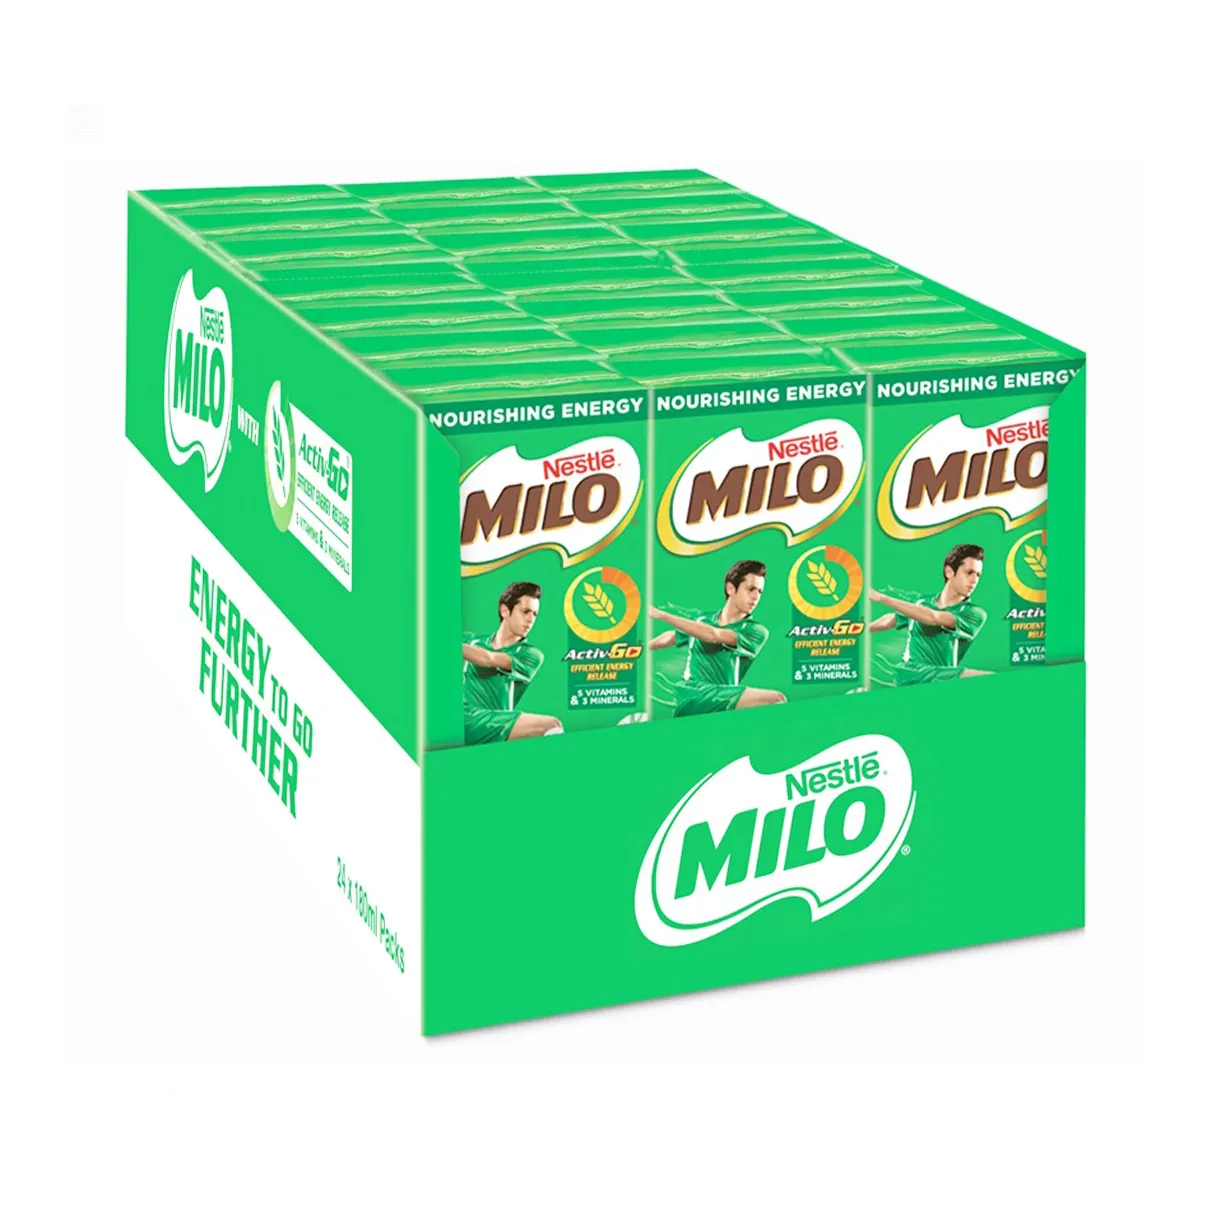 Mi-lo Powder sachet and can Packet 200g 400g 1kg 2kg